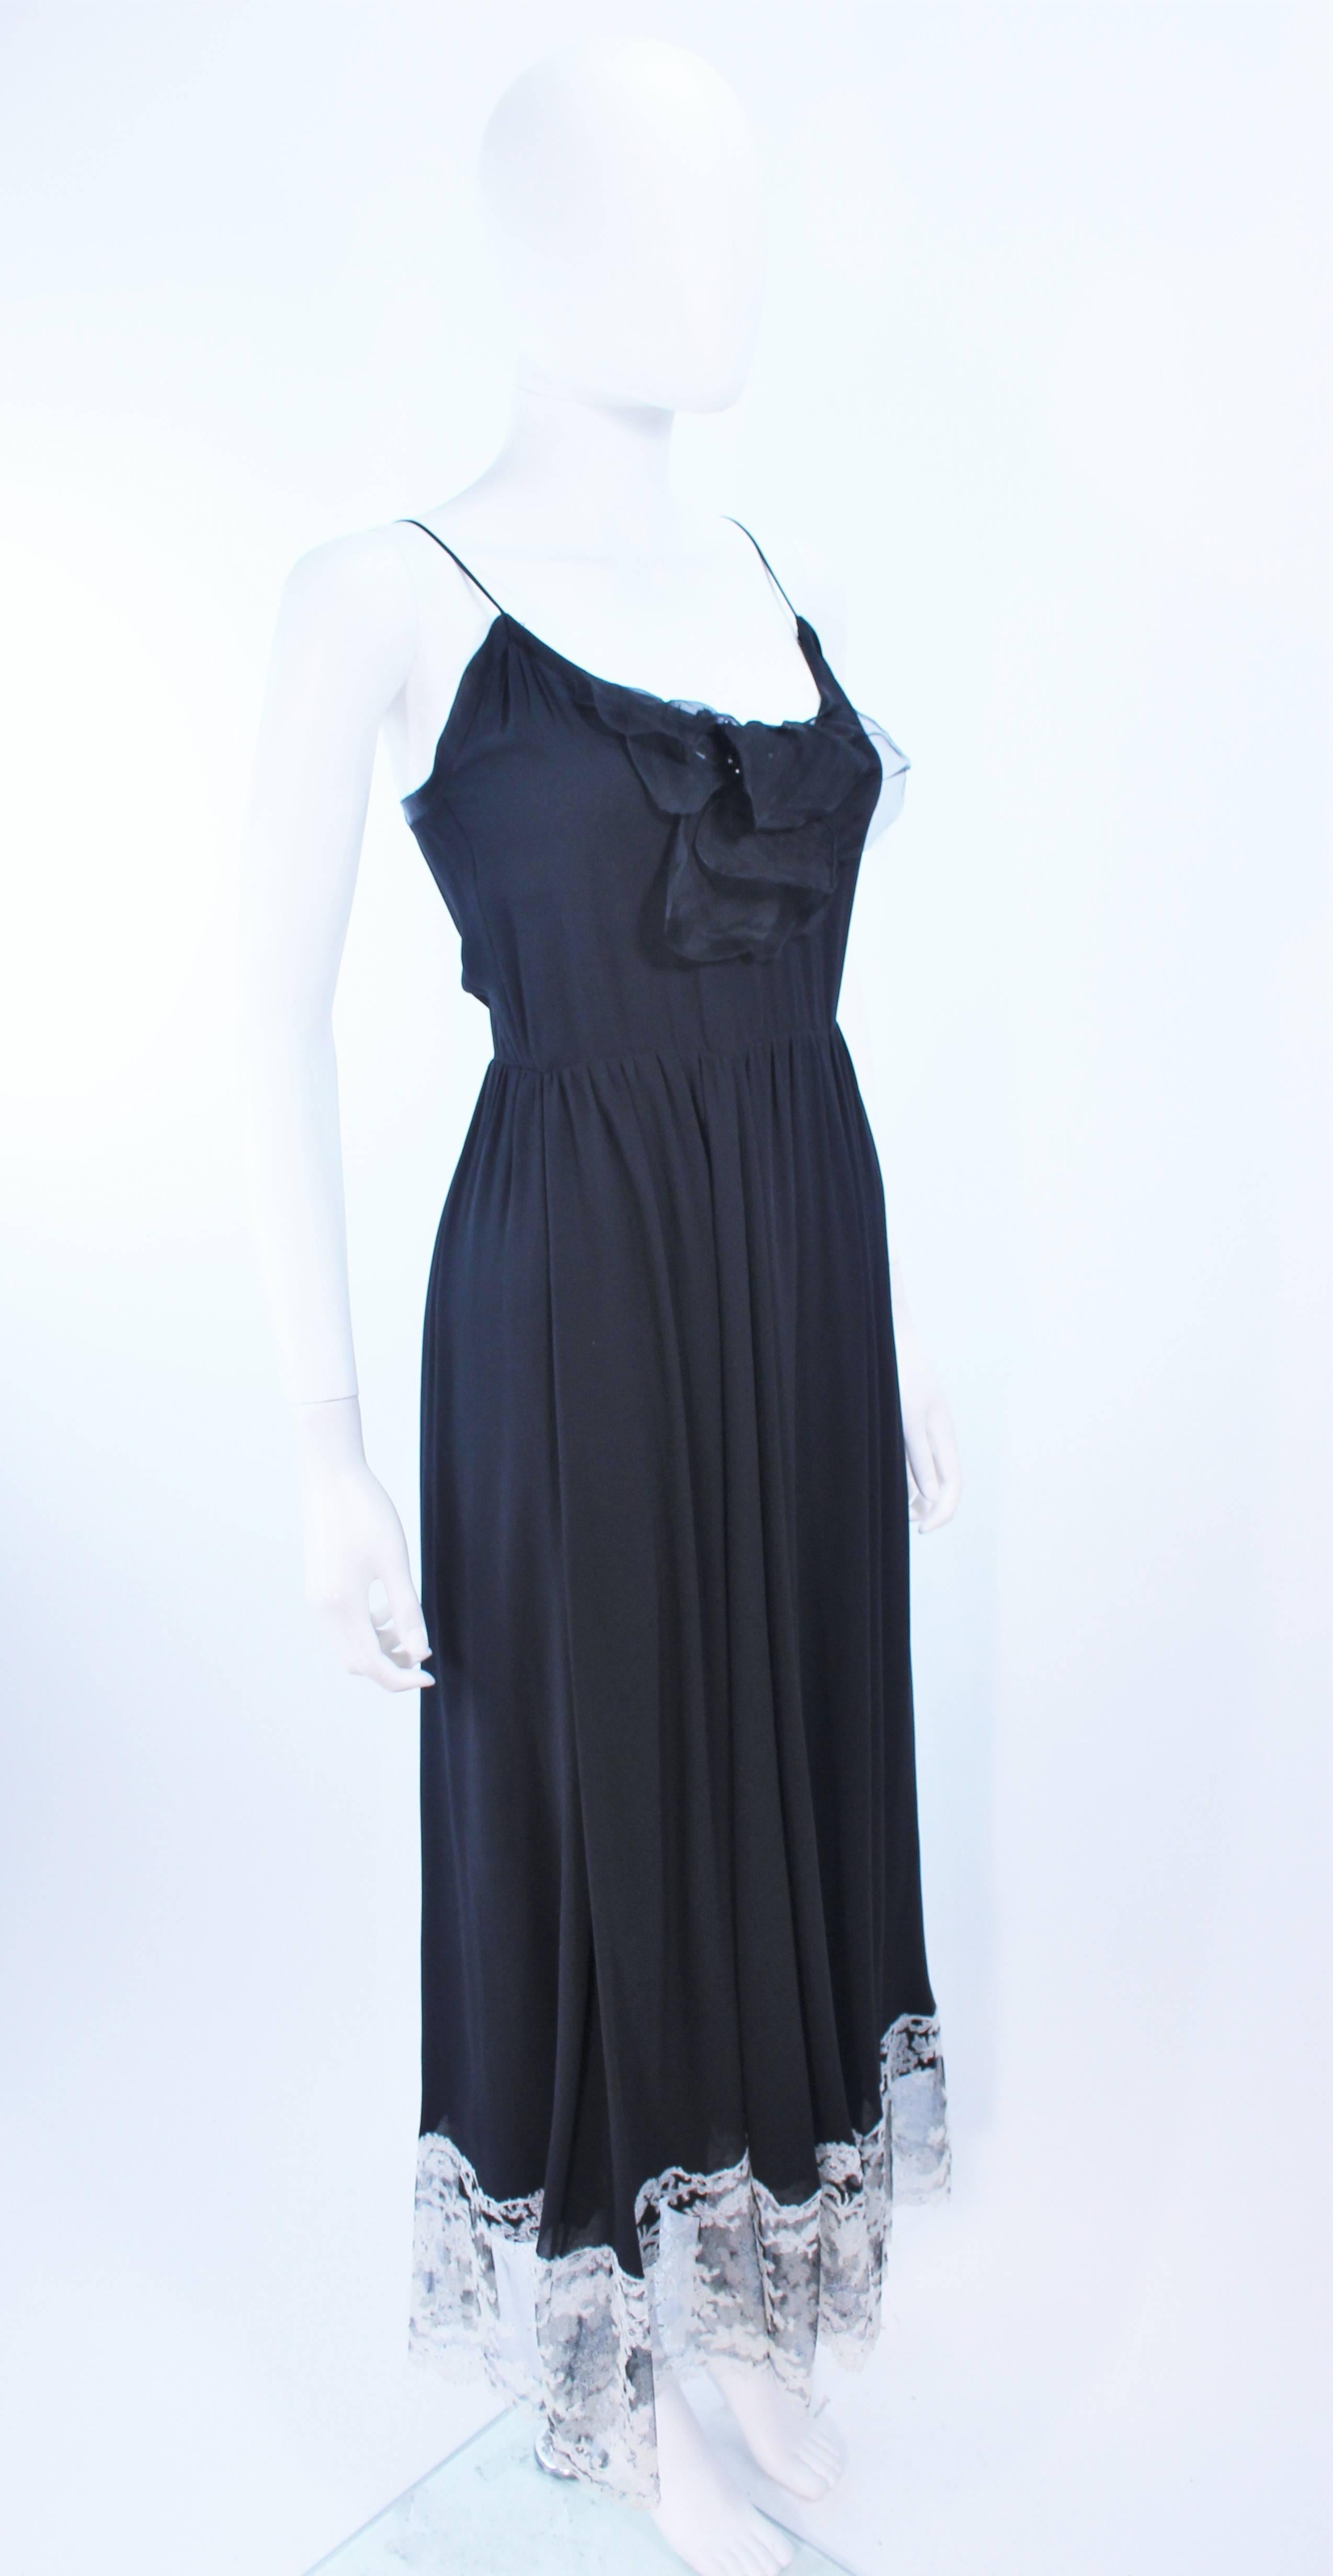 MAGGY REEVES Black Silk Chiffon Cocktail Dress with Floral & Lace Accent Size 2  For Sale 1